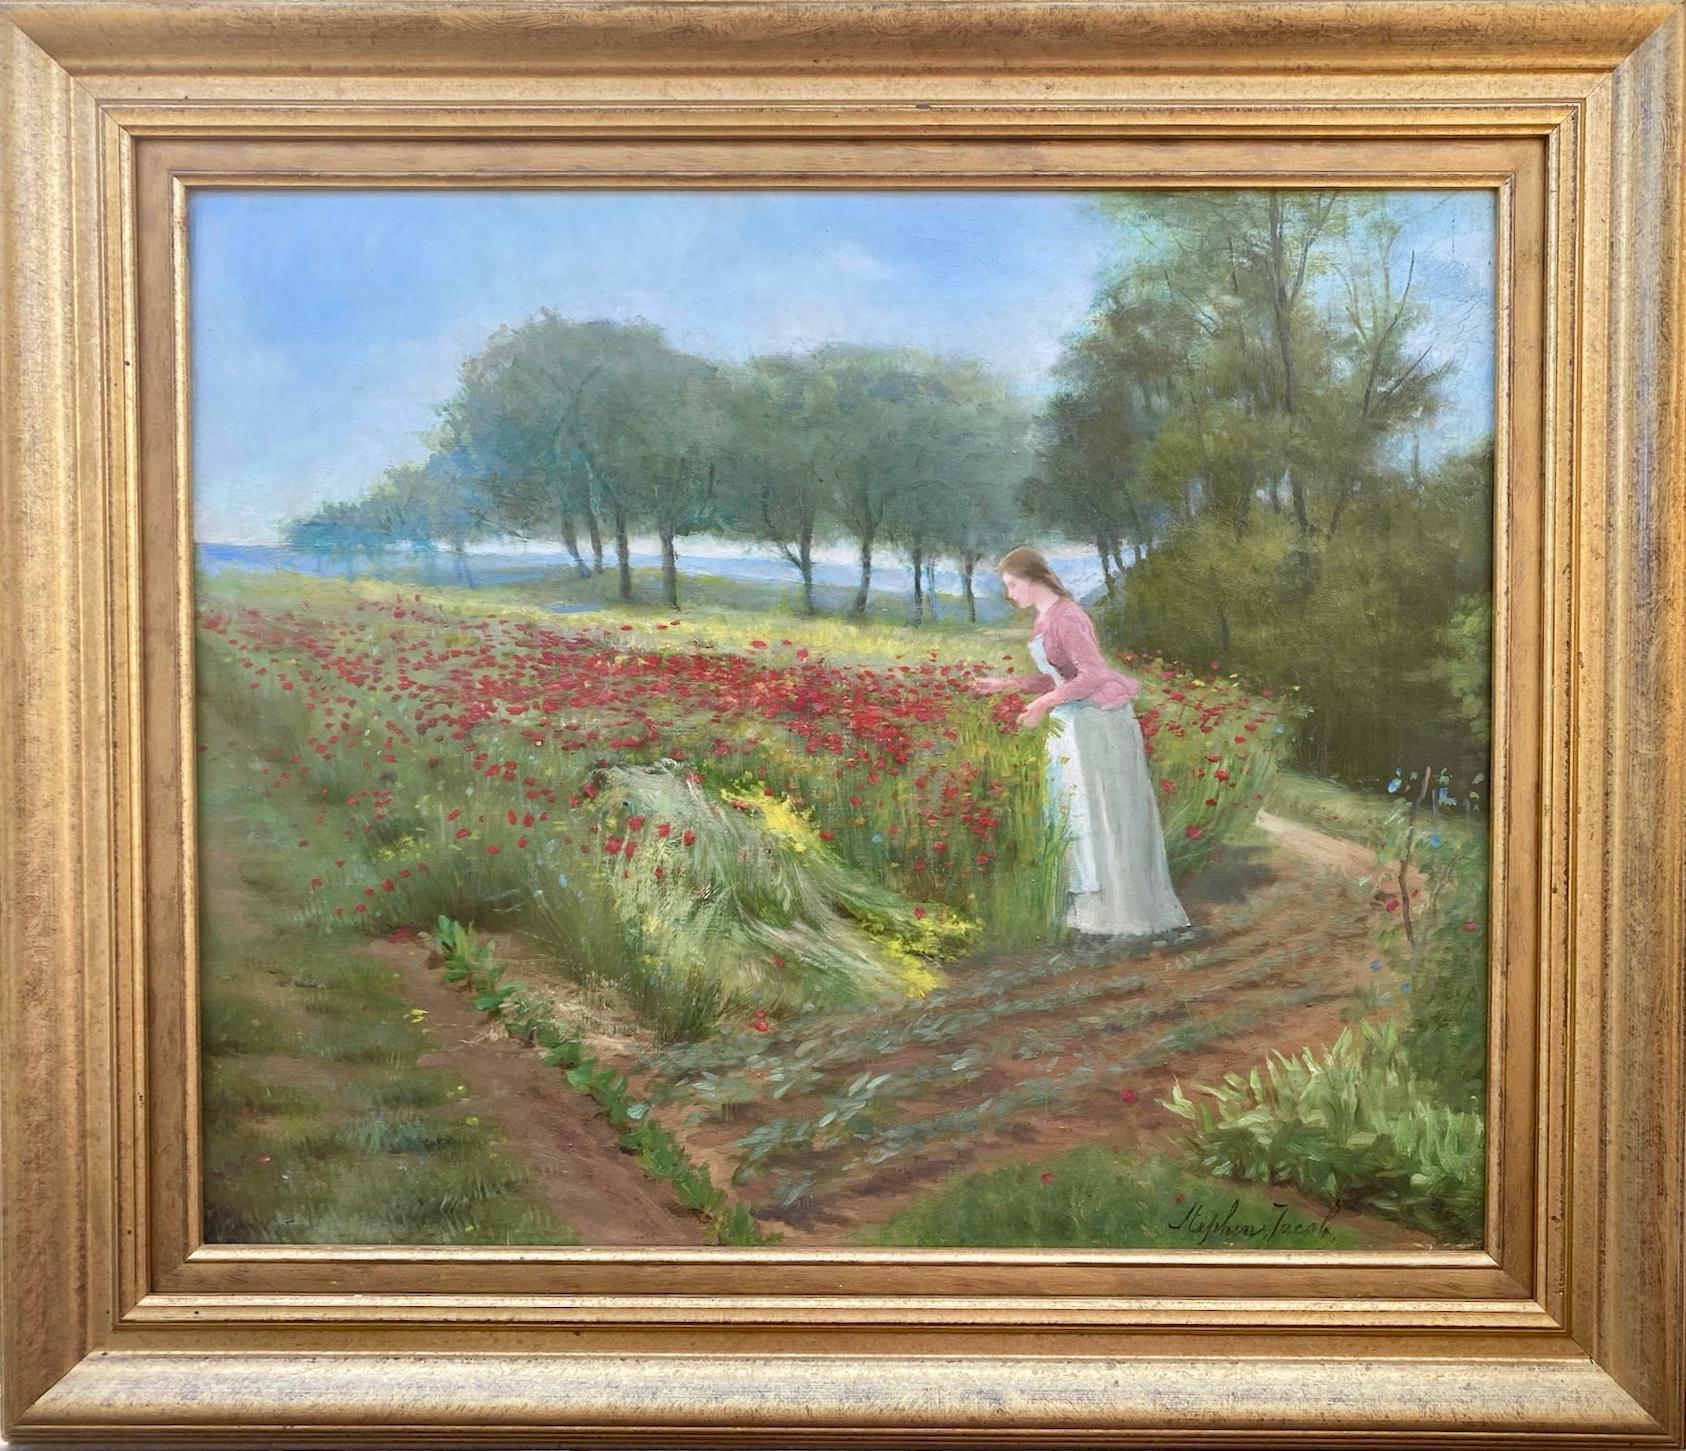 Stephen Jacob Figurative Painting - Gathering wild red poppies: woman in a poppy field French Impressionist painting